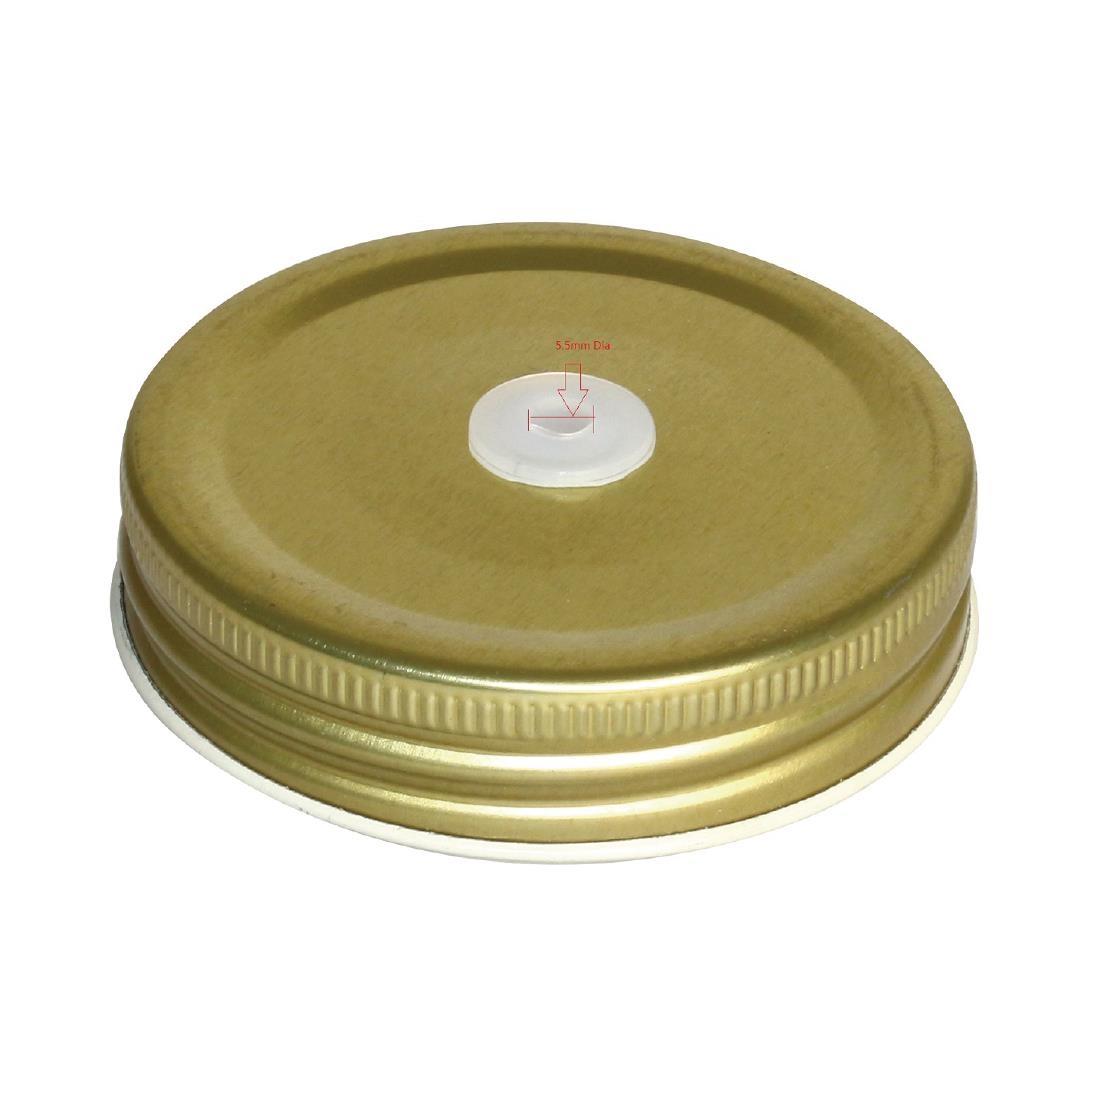 Olympia Mason Jar Lid with Straw Hole (Pack of 12) - CE679  - 1